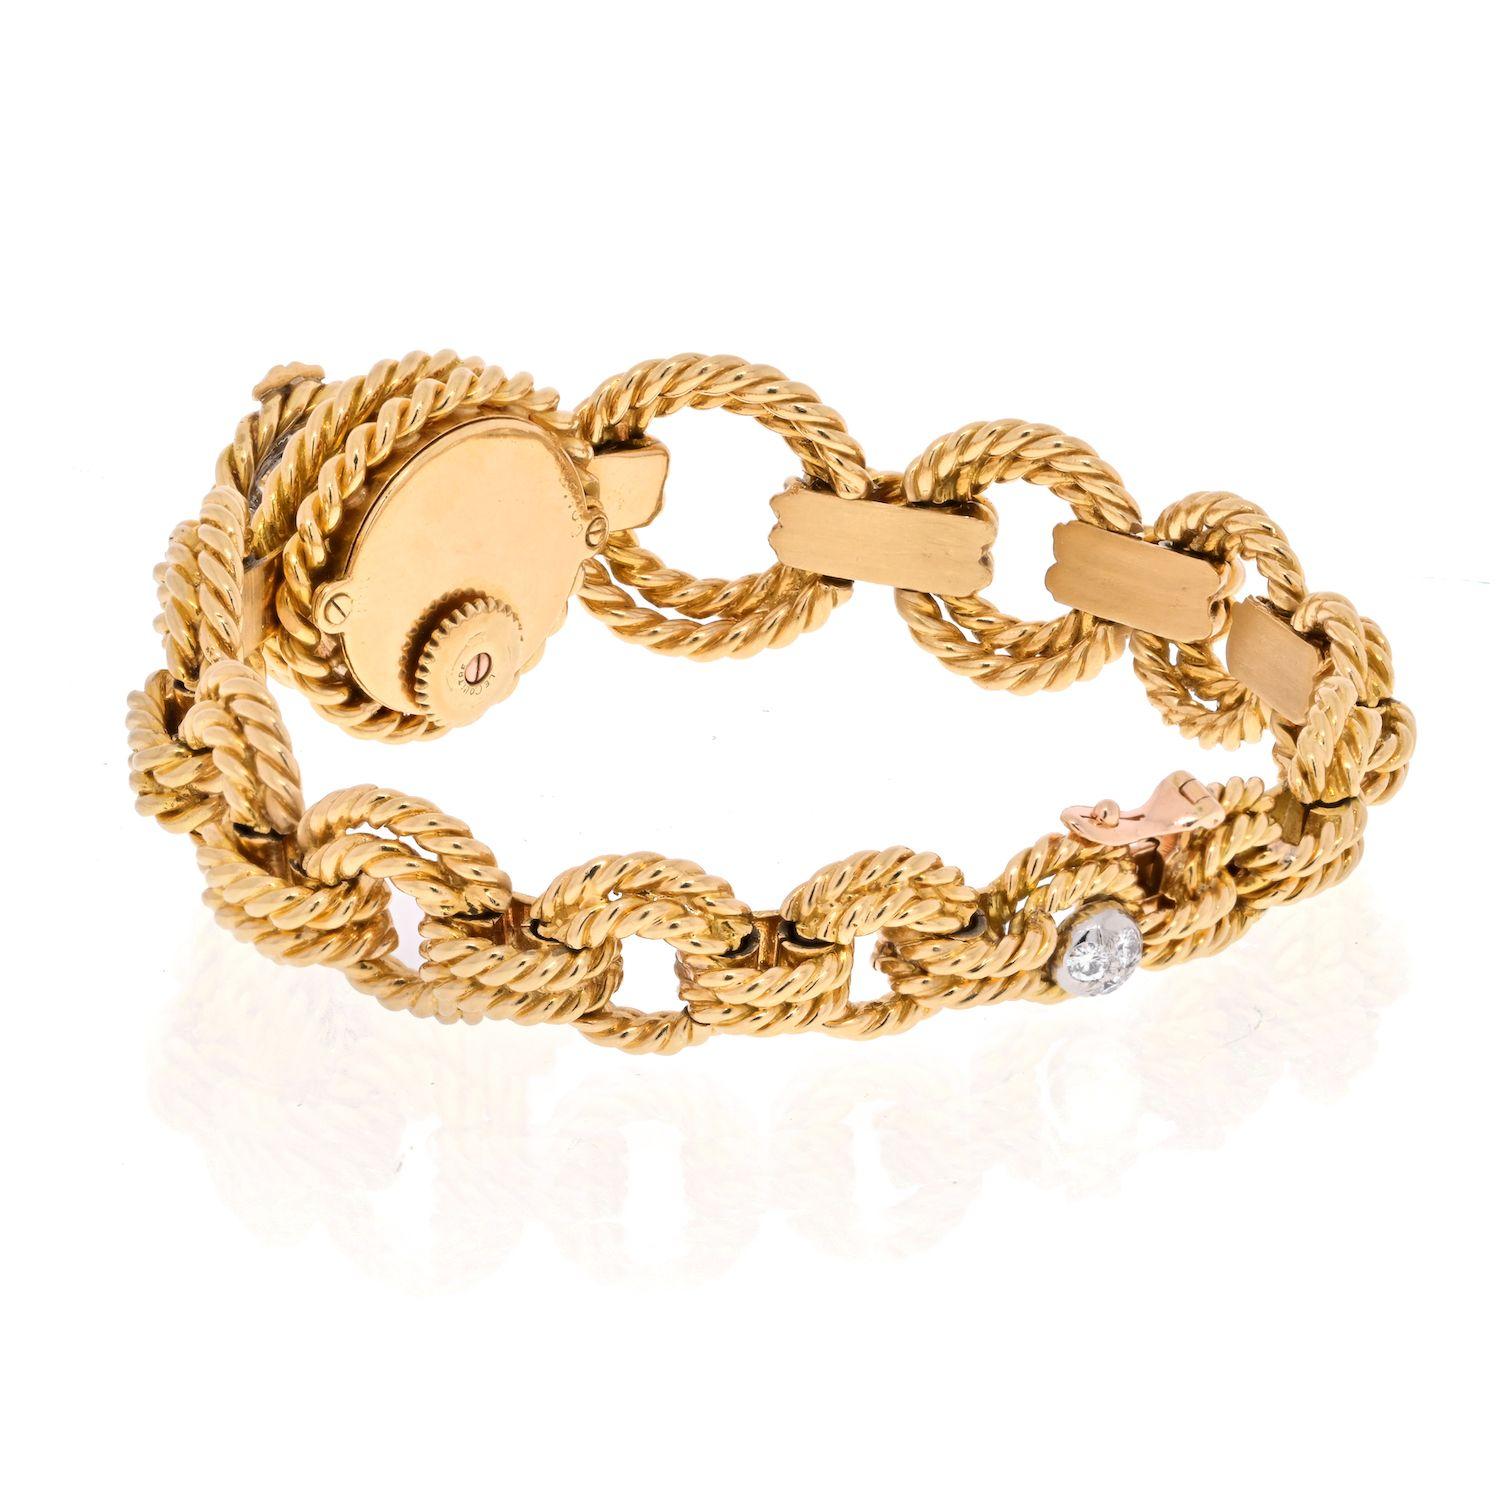 Very special item designed by Van Cleef & Arpels, this is a ropetwist gold and diamond open link bracelet watch. Designed with graduating twist rope segments whith the center section flipping open to reveal the hidden timepiece. 
Made in 18K and